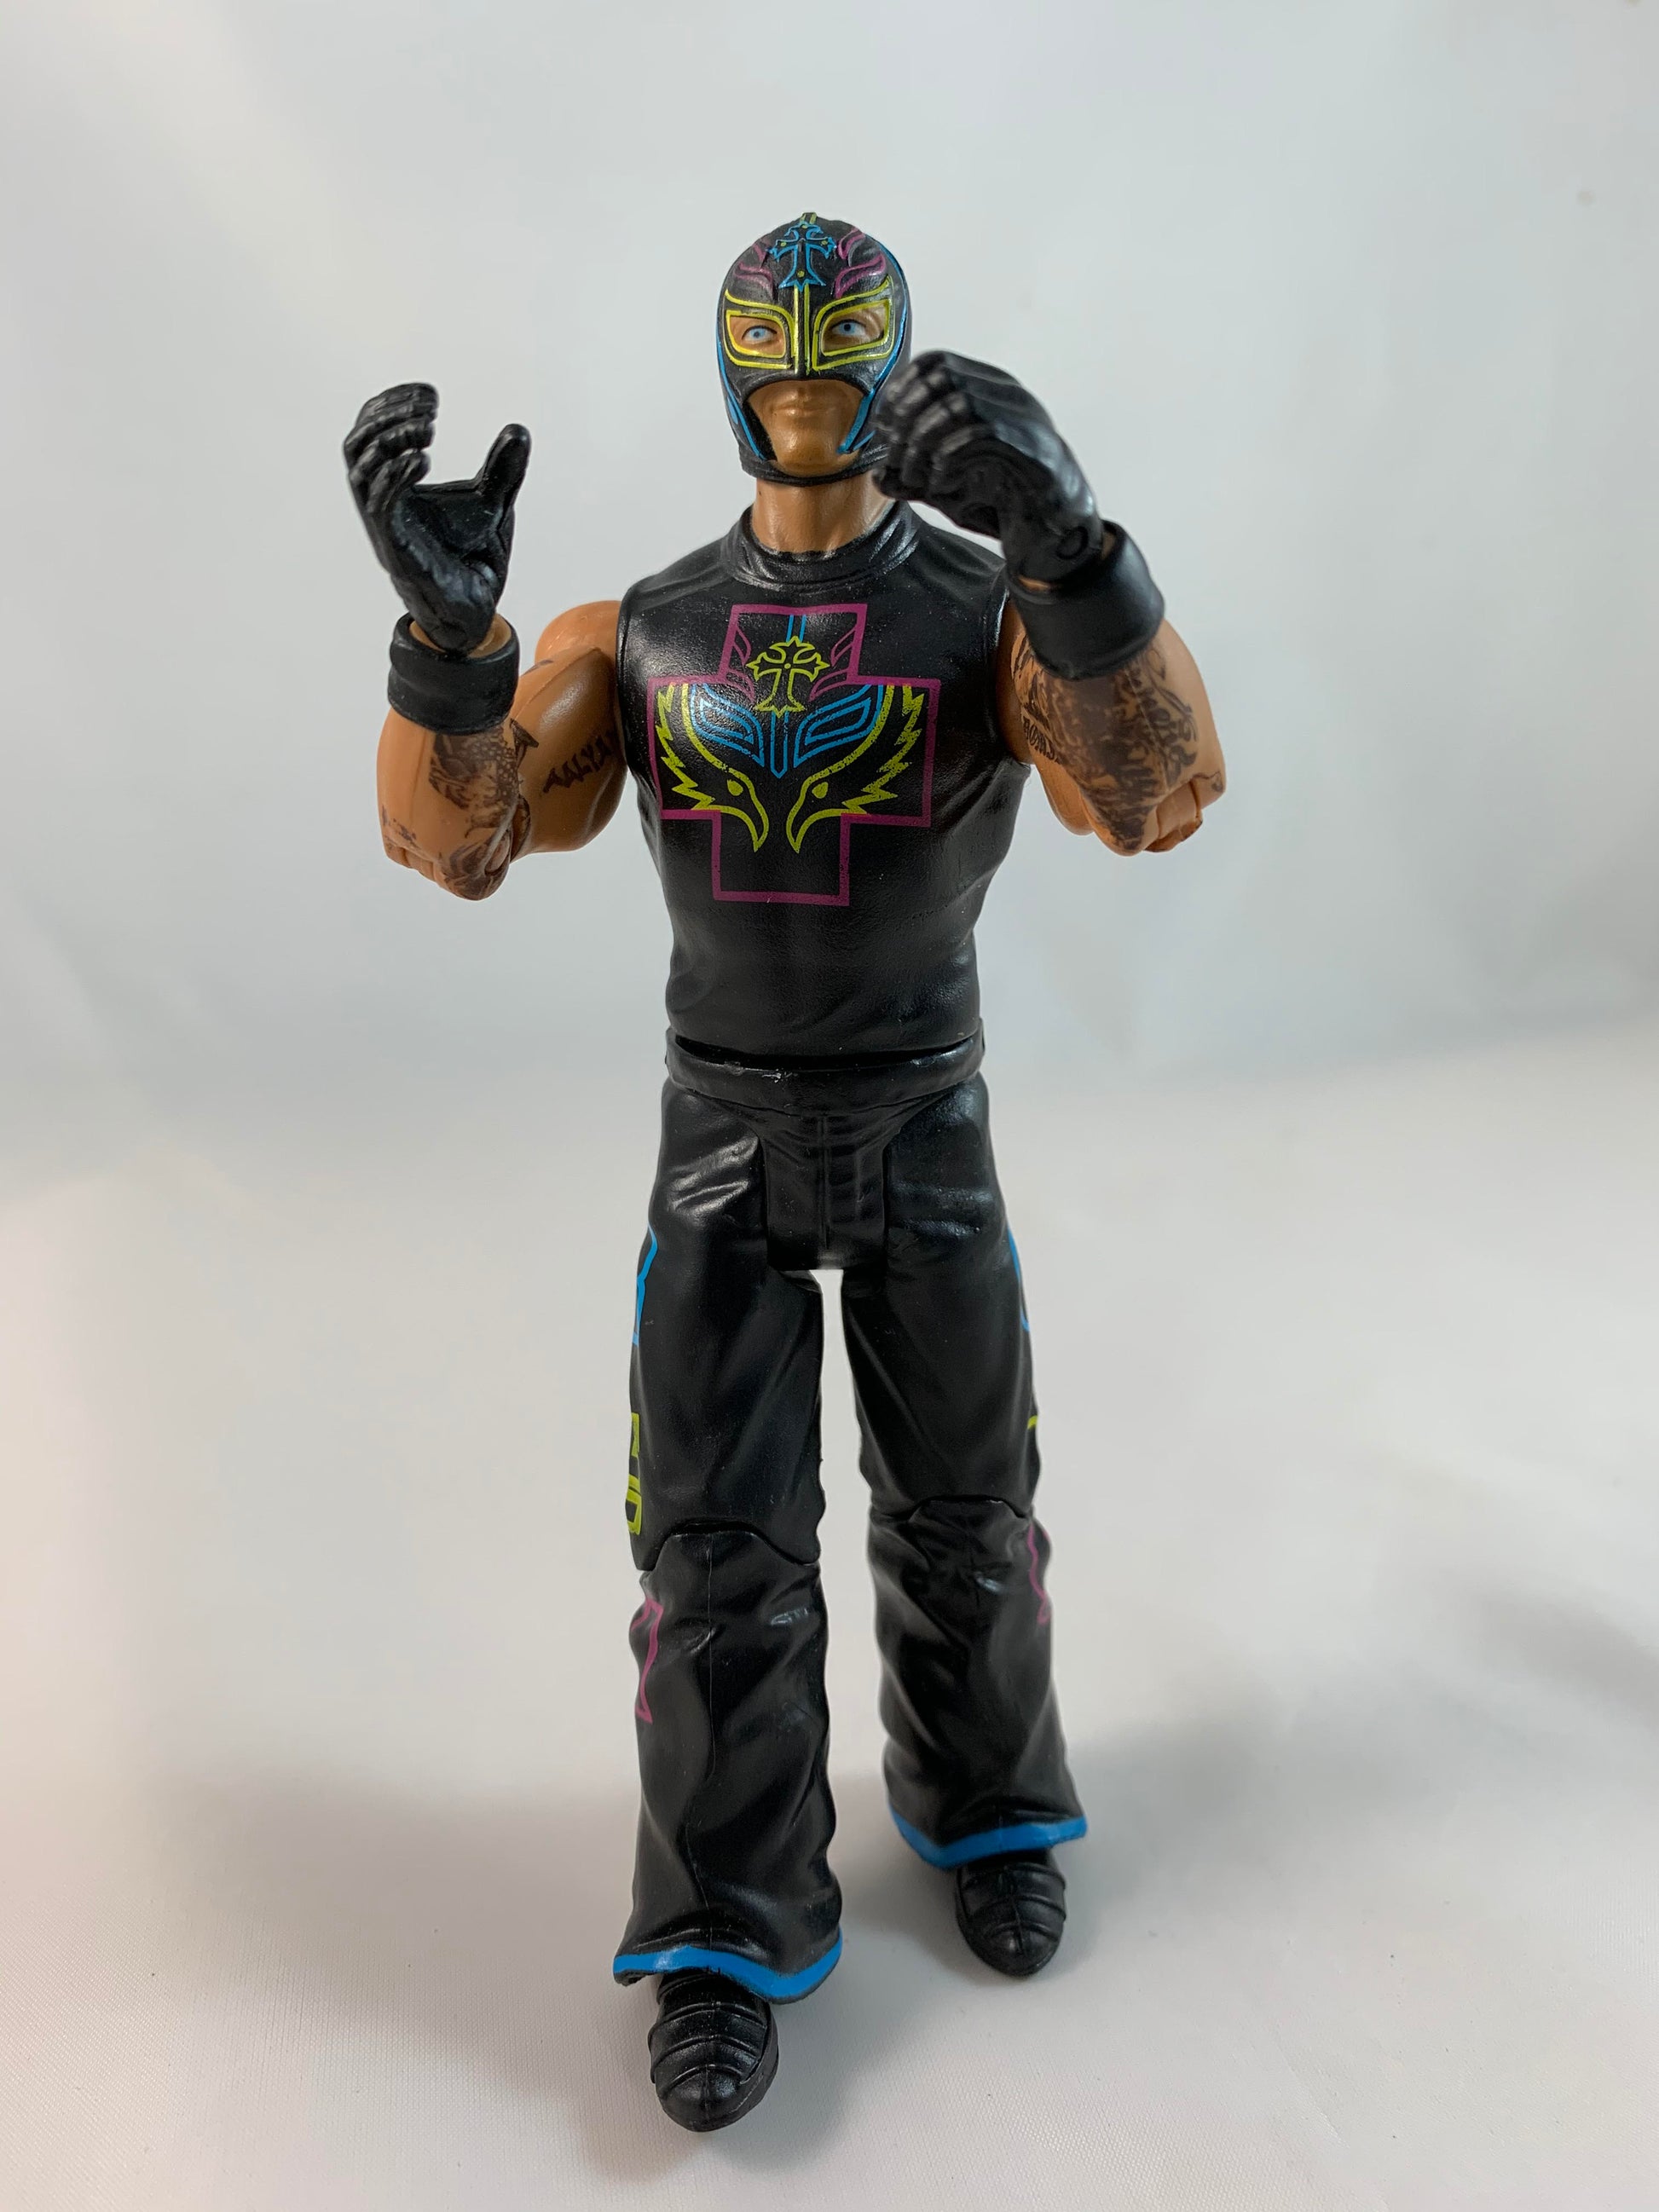 2011 Rey Mysterio WWE WRESTLING Action Figure 619 Black Outfit and Mask Mattel - Loose Action Figure